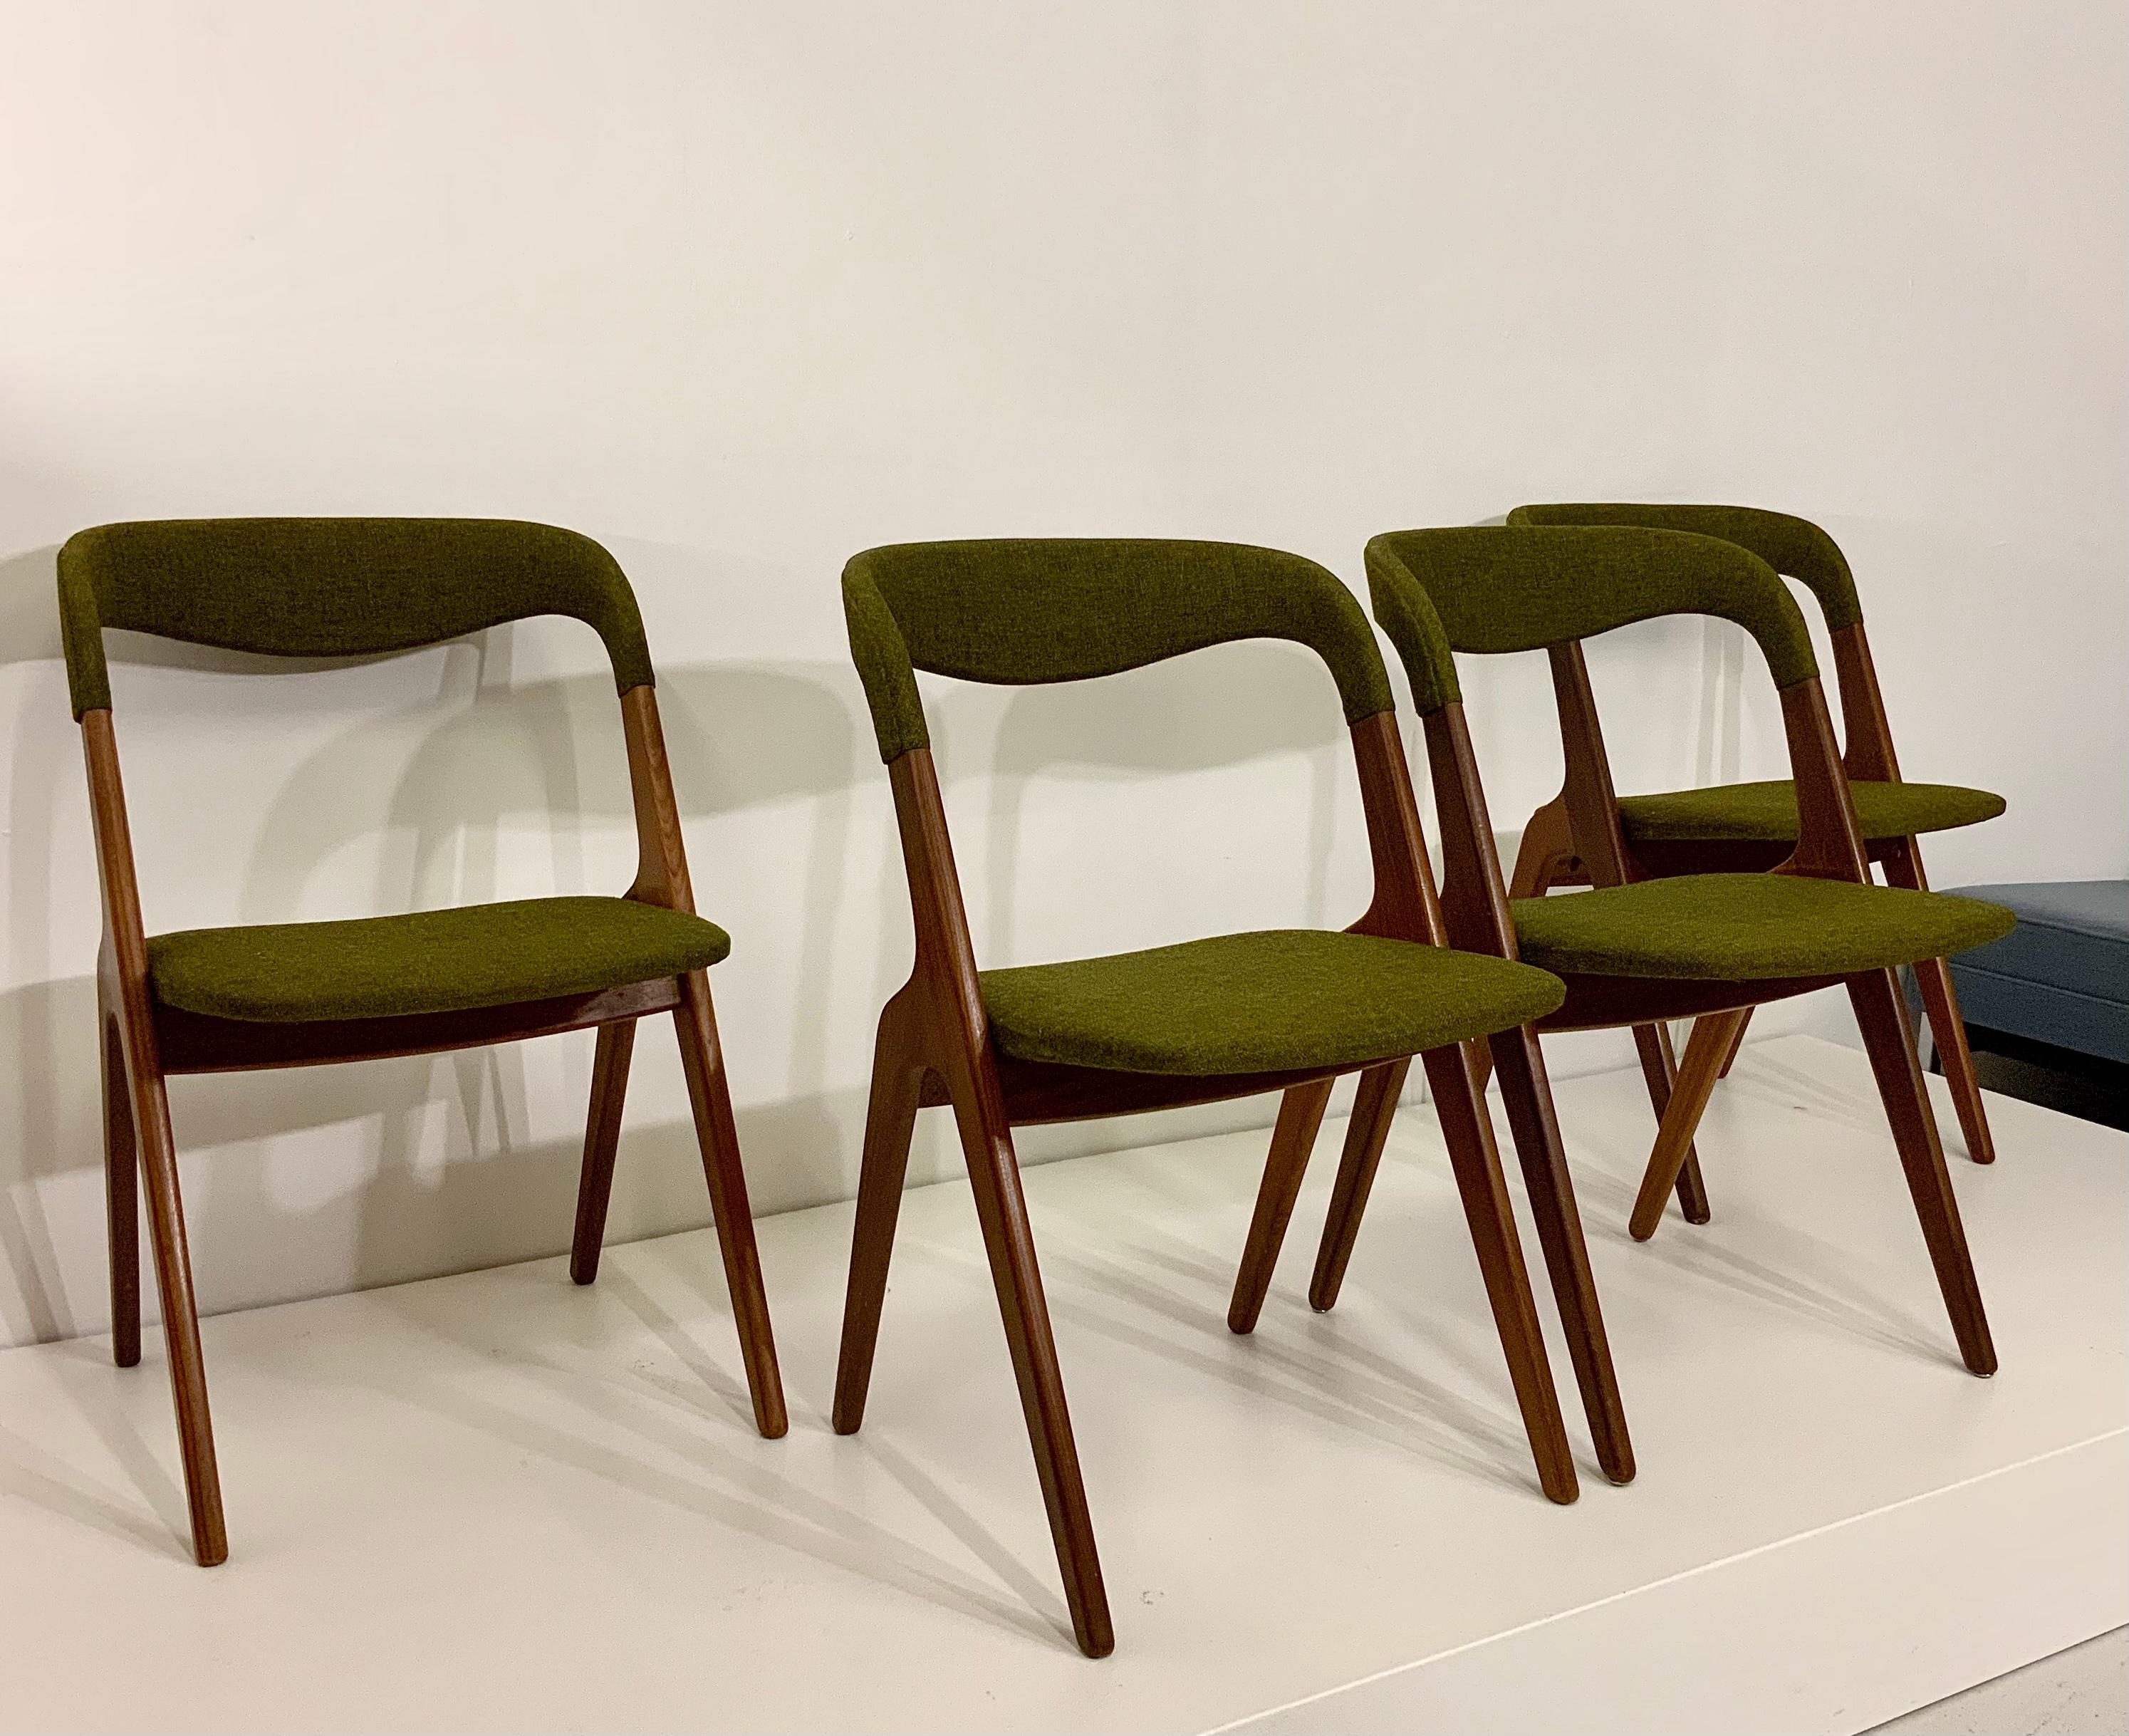 This offer is for a set of four very rare vintage sculptural Danish design classic dining chairs.

+ Classic Danish Scandinavian Modern upholstered iconic chairs with frame in solid teakwood, well padded and with solid structure.
+ Fabric cover